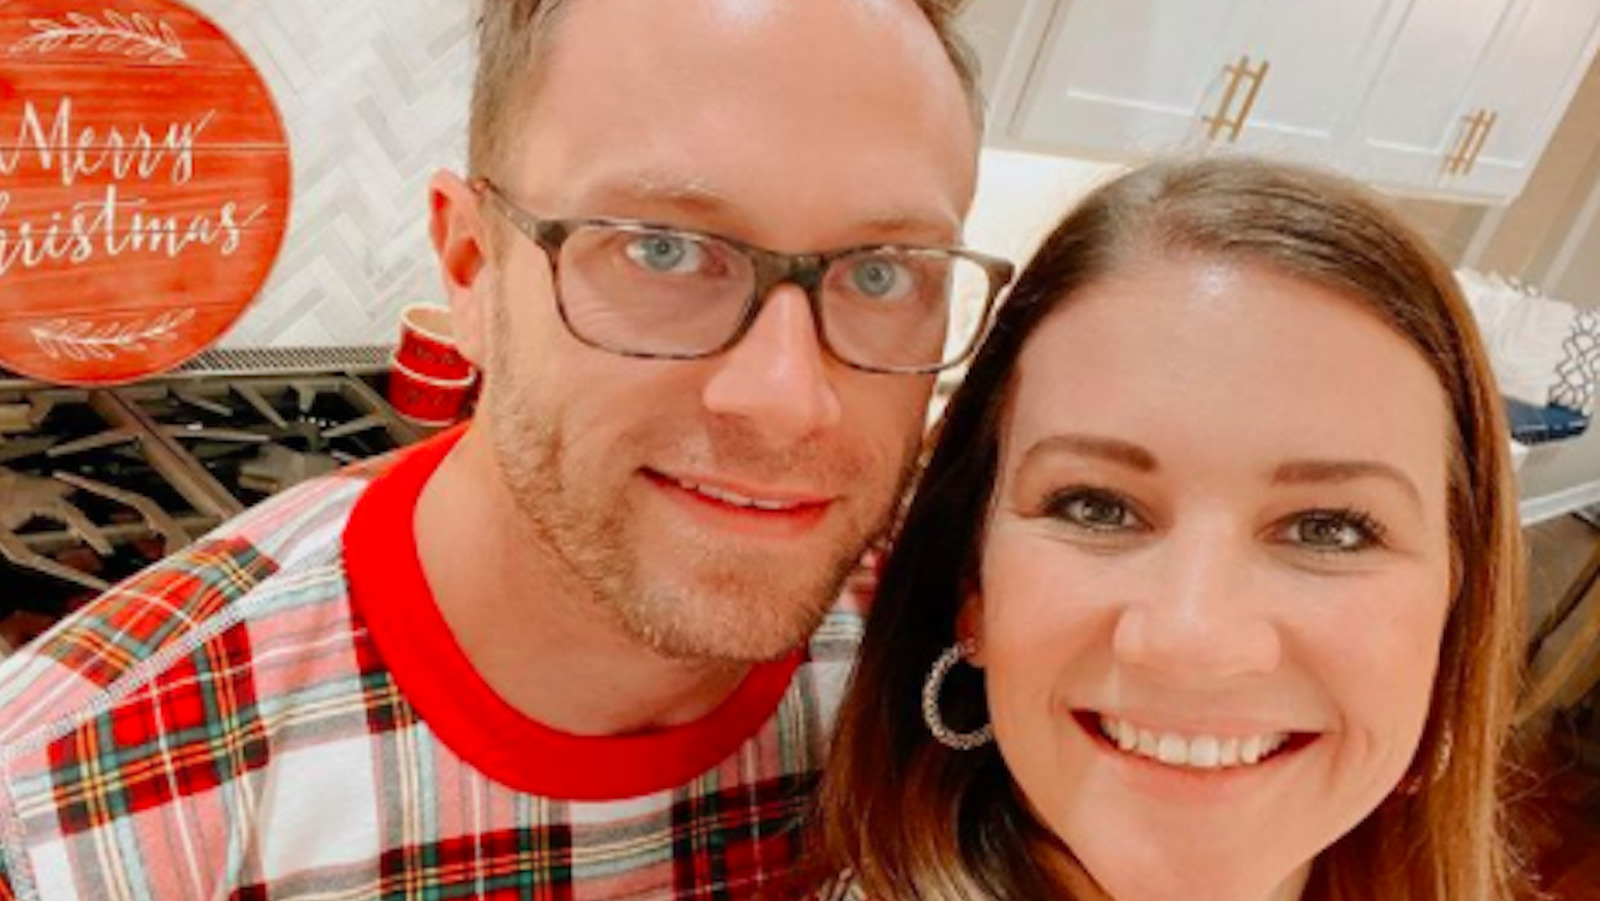 OutDaughtered's Danielle Busby Reveals The Truth About Plastic Surgery